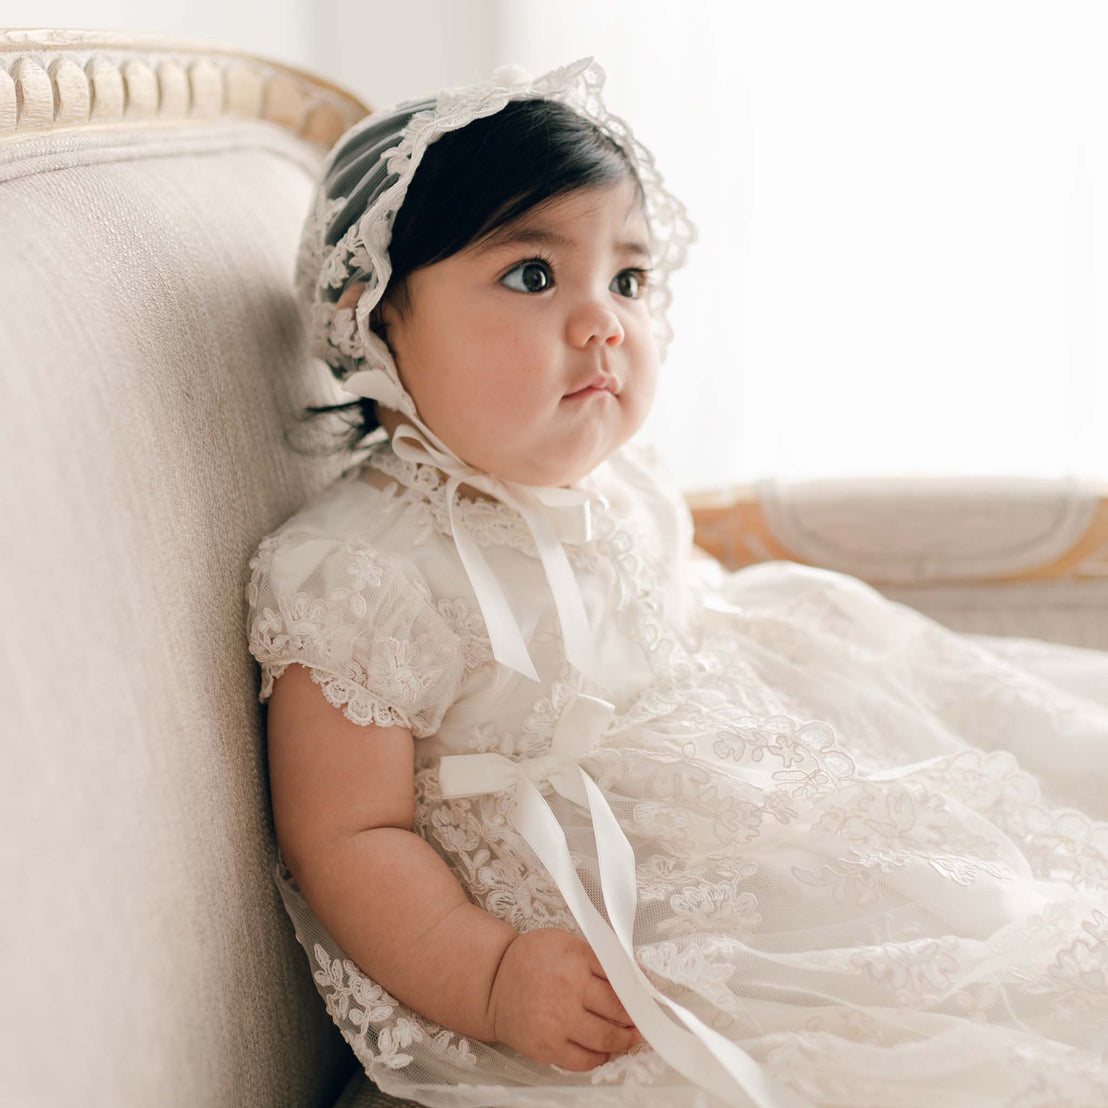 Baby girl heirloom style bonnet and baptism gown